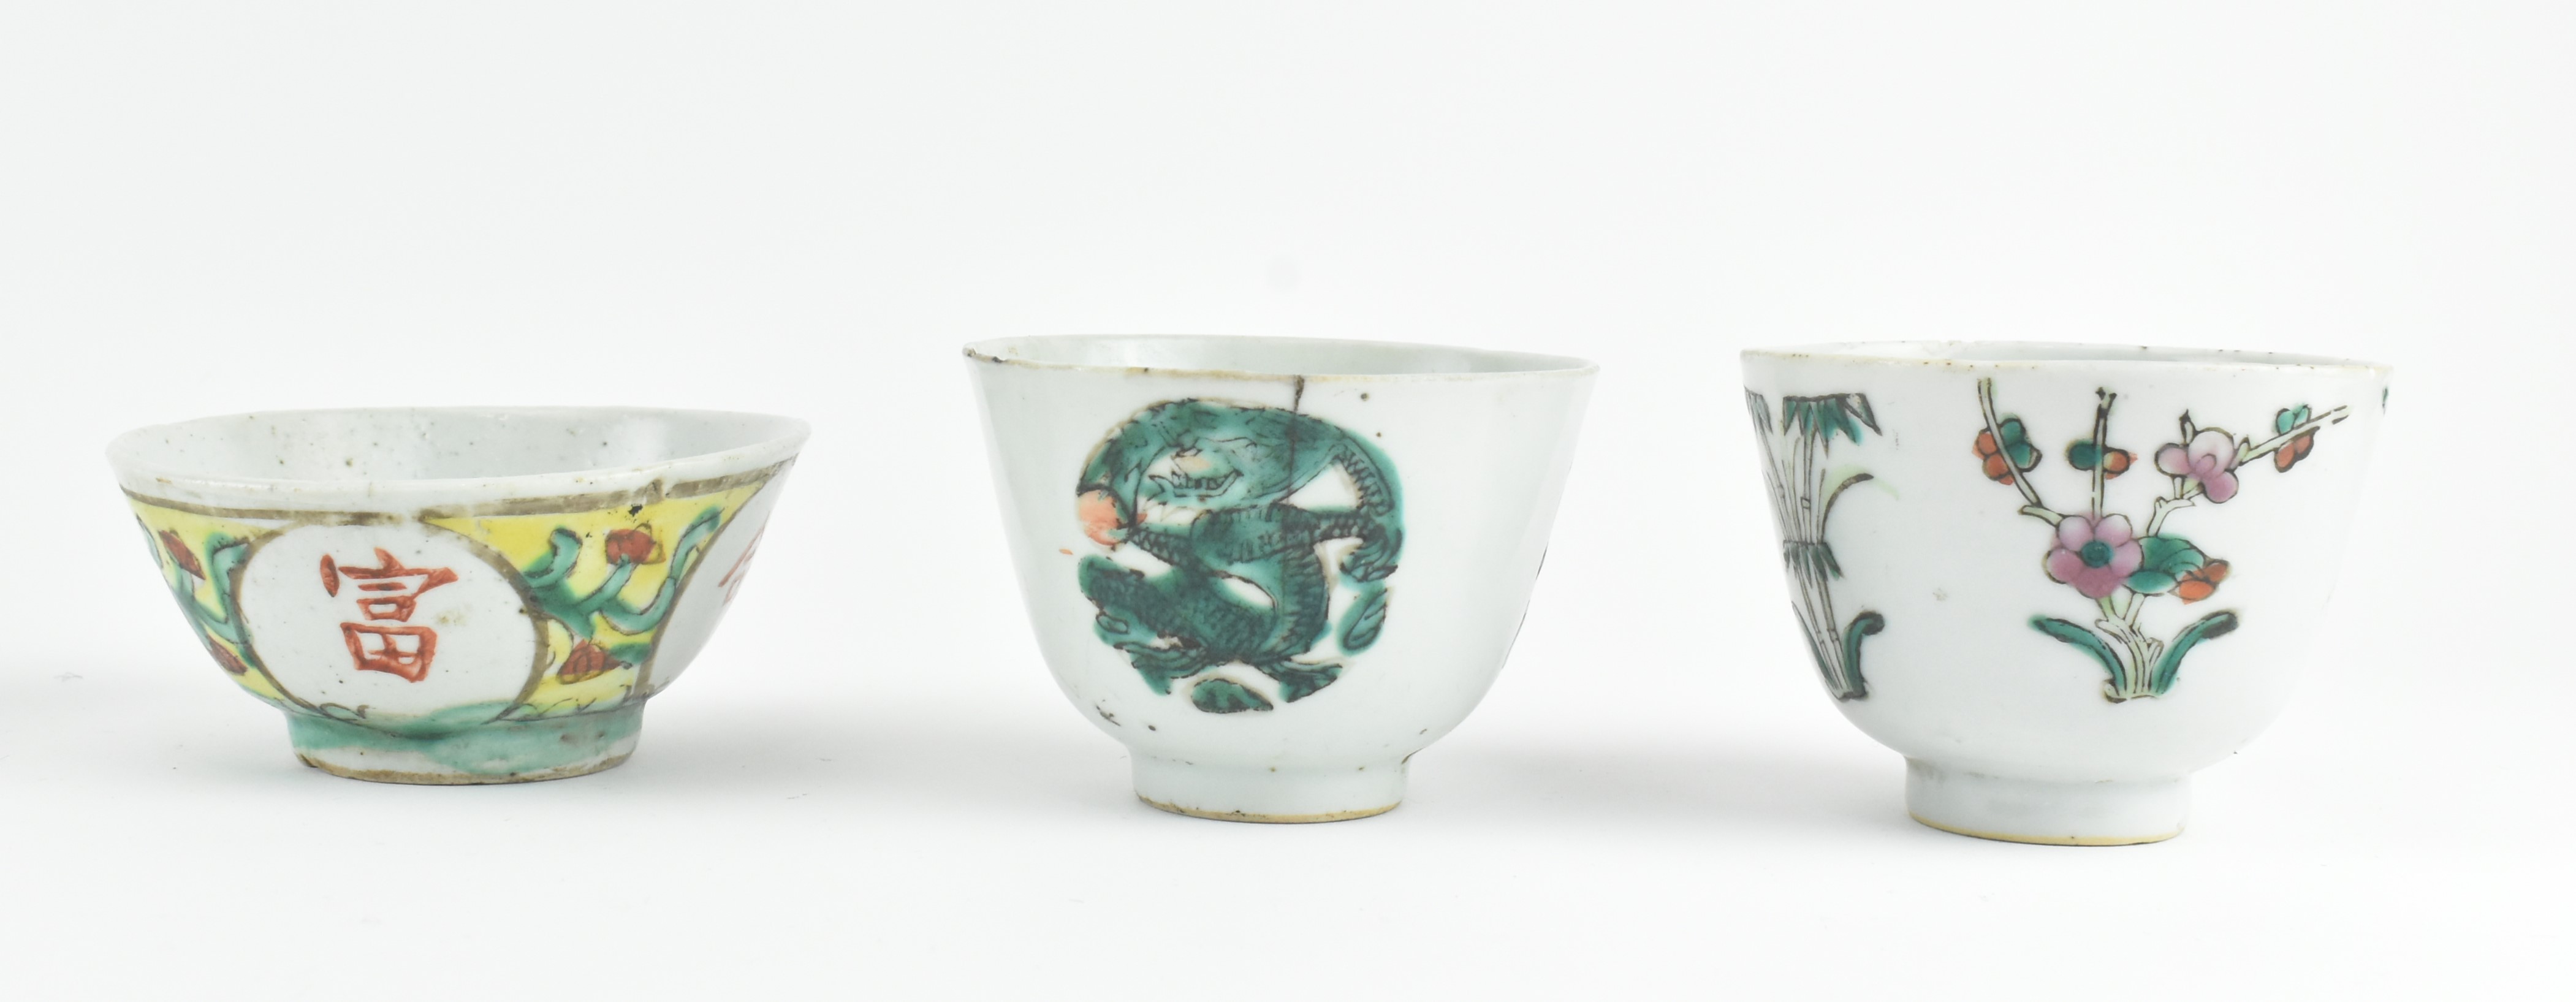 GROUP OF SIX QING DYNASTY CERAMIC ITEMS 清 陶瓷六件 - Image 2 of 7